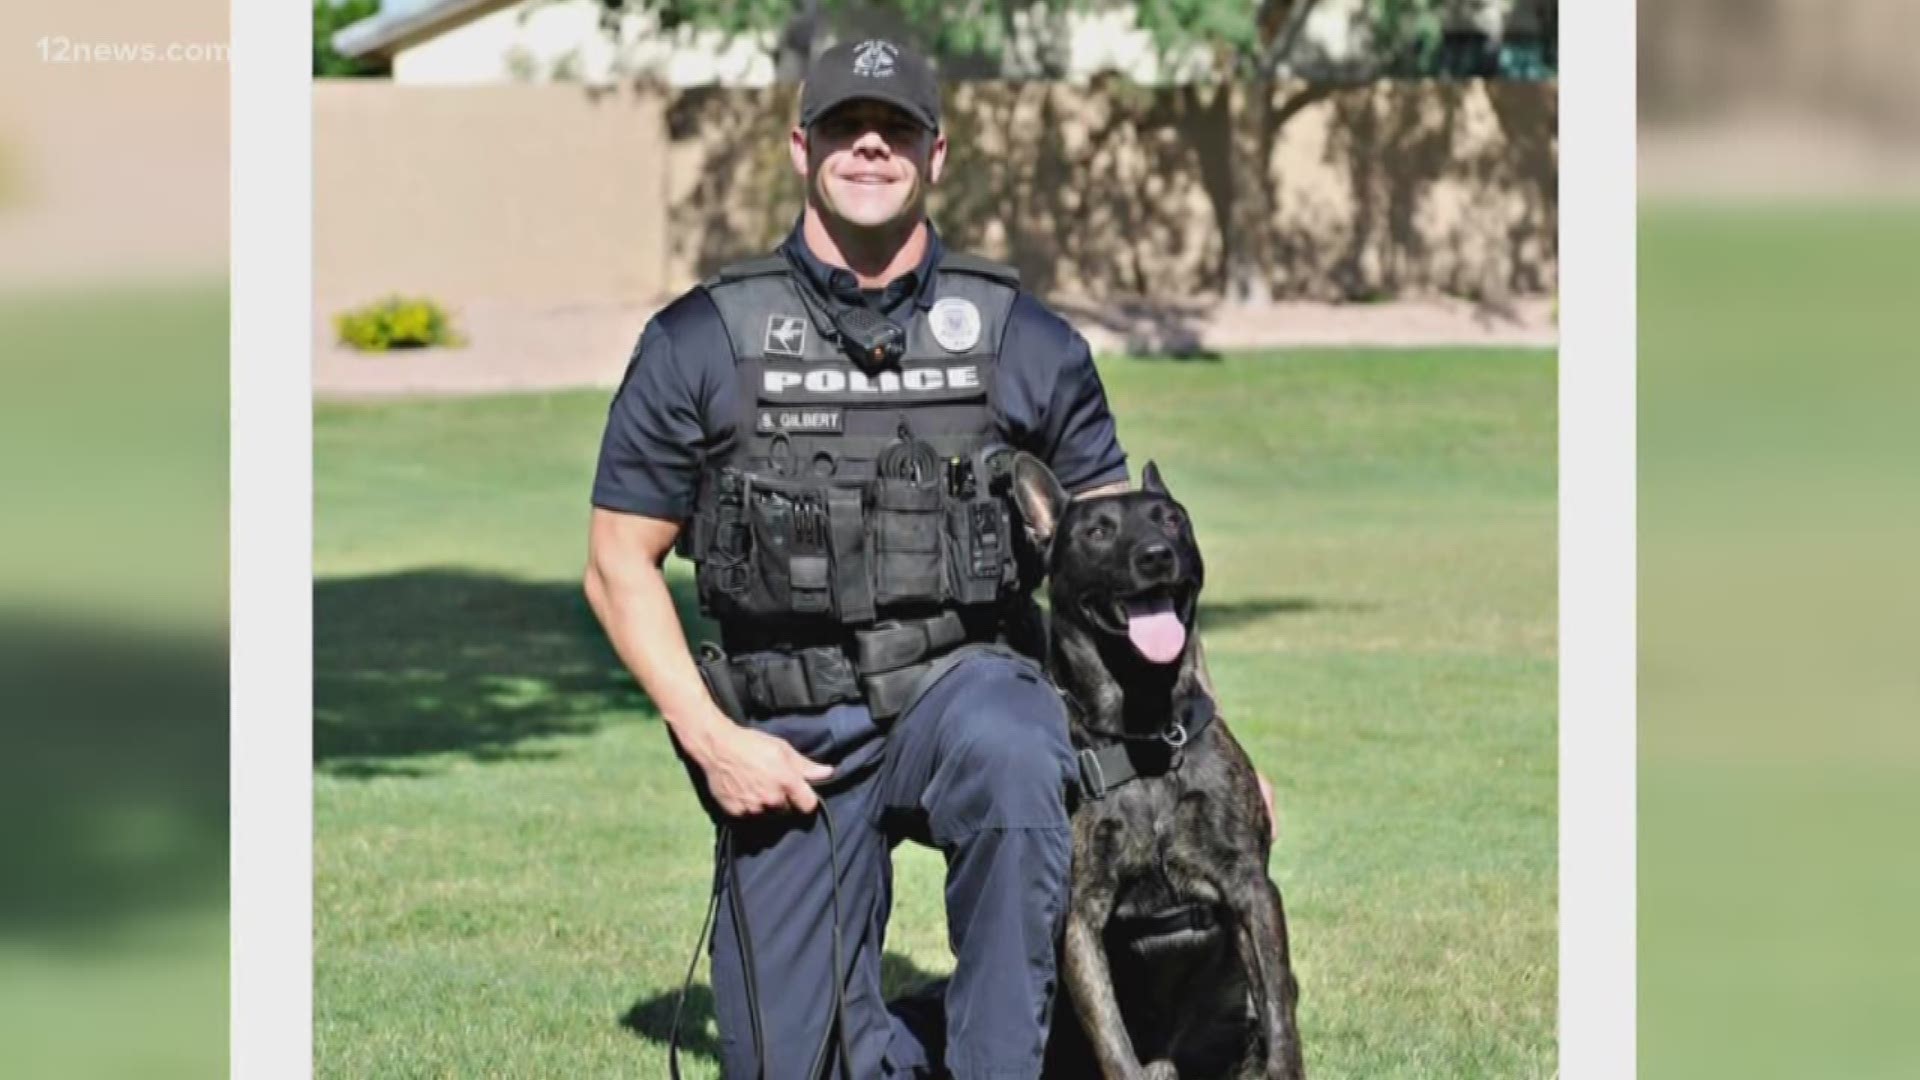 Gilbert police released a statement and photo marking the passing of one of their K9 officers. Murphy joined the force in 2013 and ended up passing from an aggressive form of cancer.